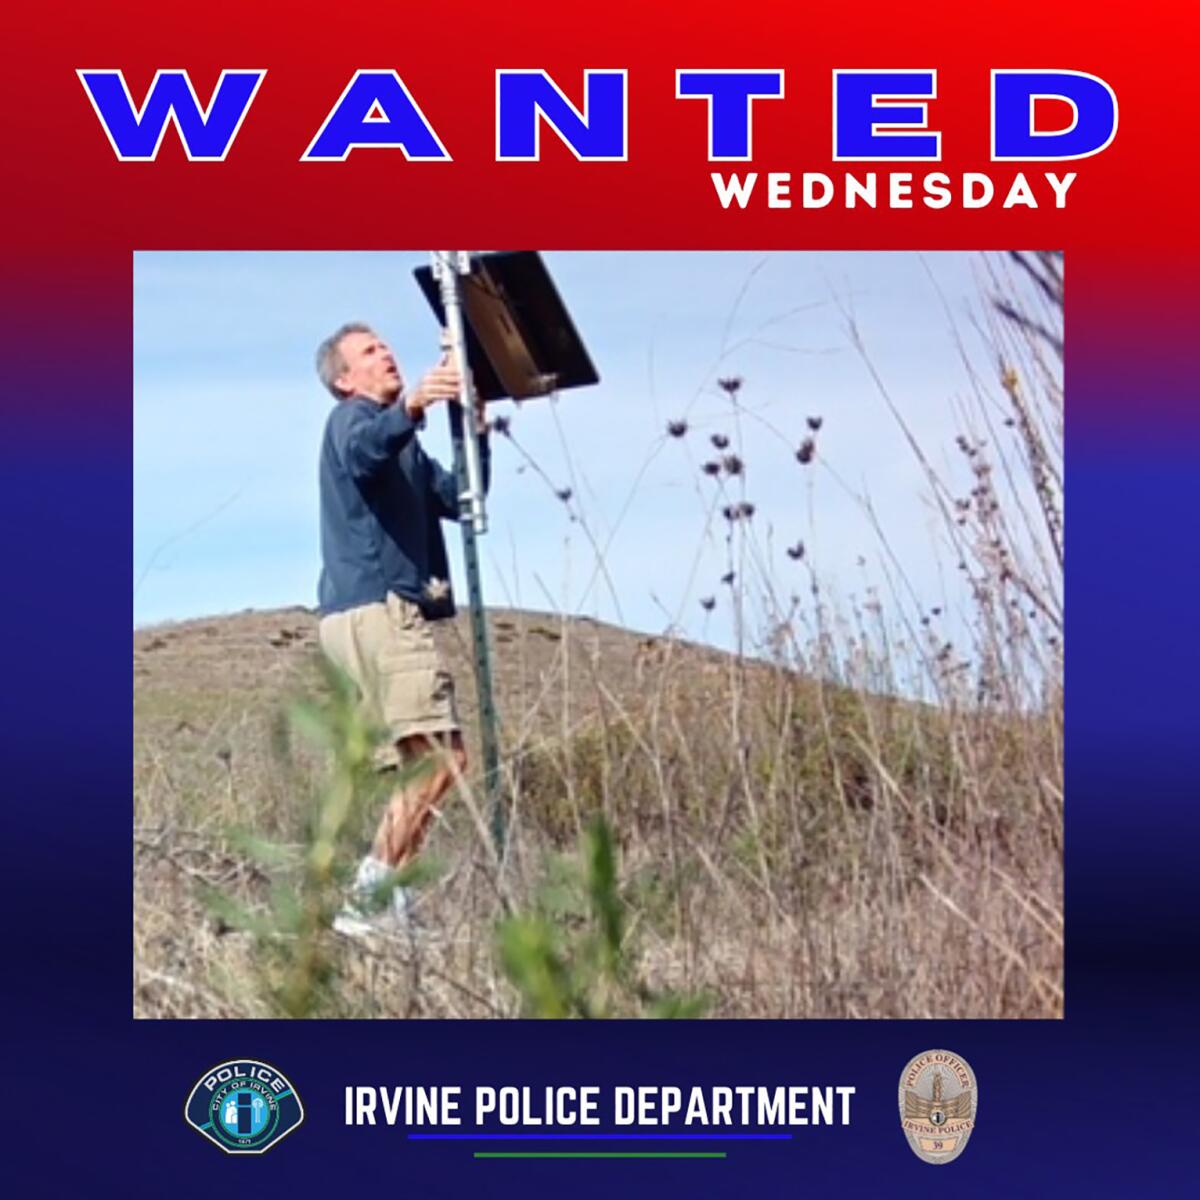 A wanted poster shows a gray-haired man in shorts handling equipment on a metal pole amid weeds and grass.